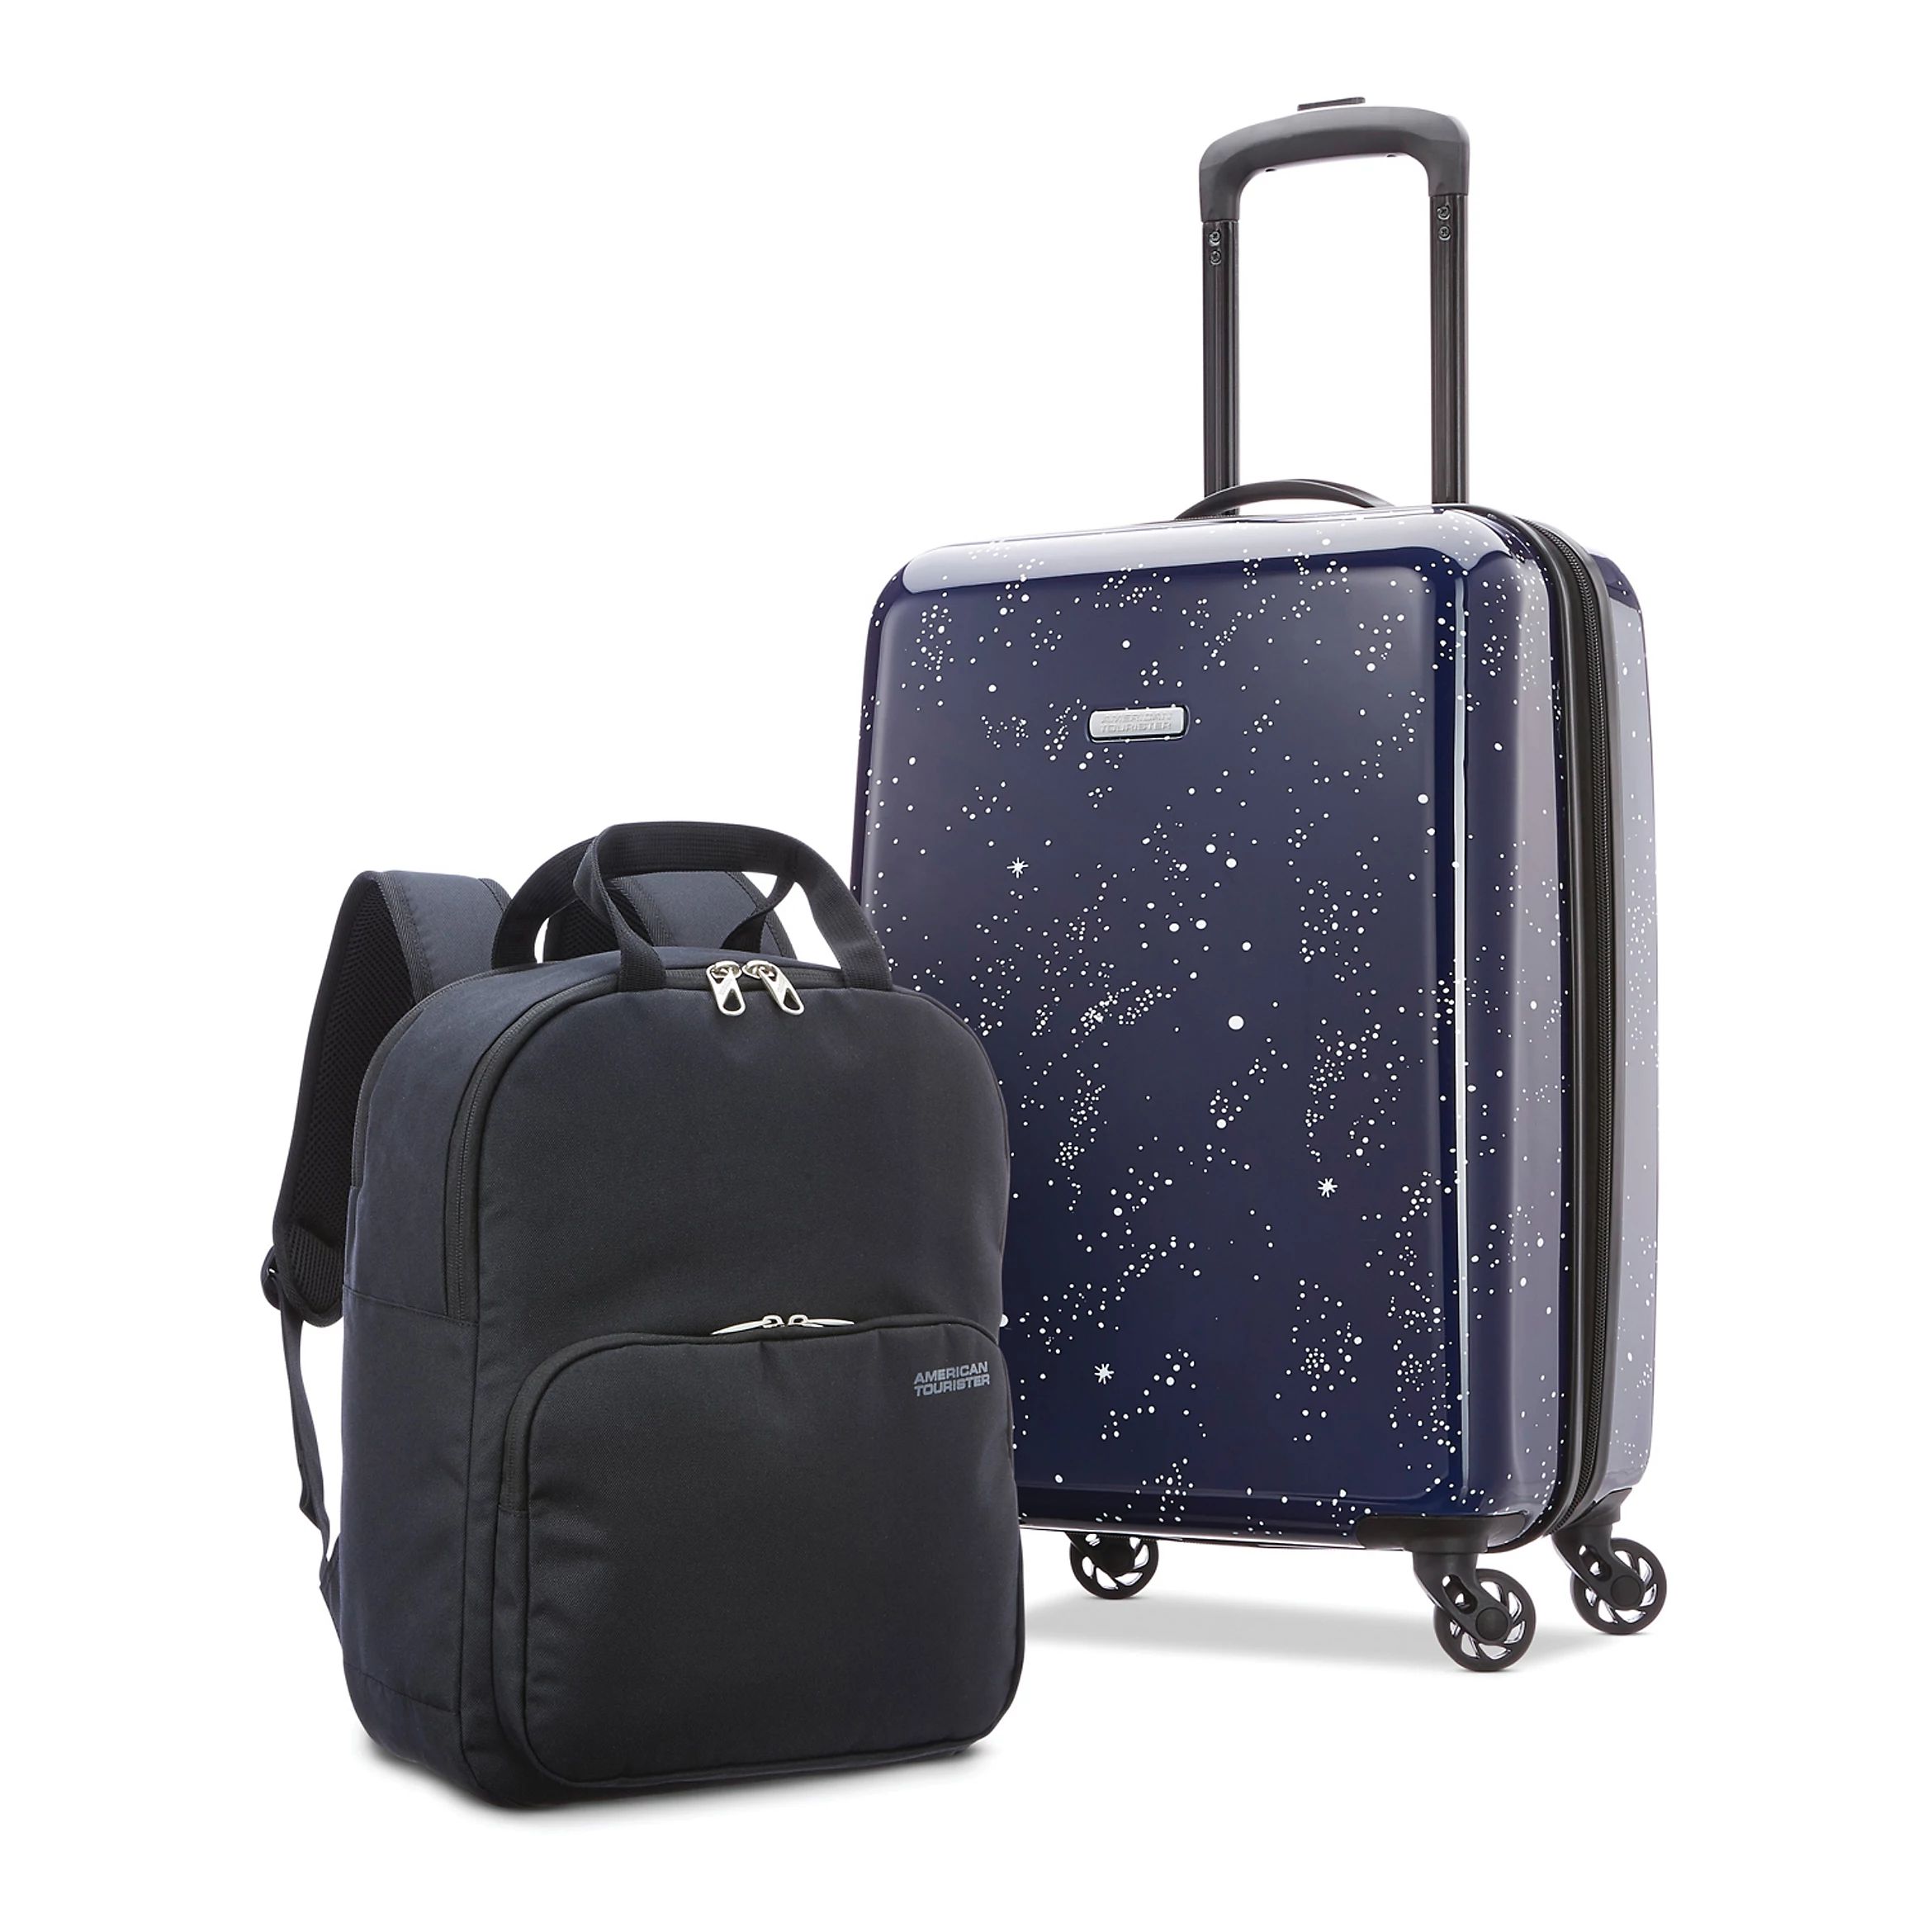 American Tourister Brookside 2-Piece Carry-On Spinner Luggage and Backpack Set | Kohl's